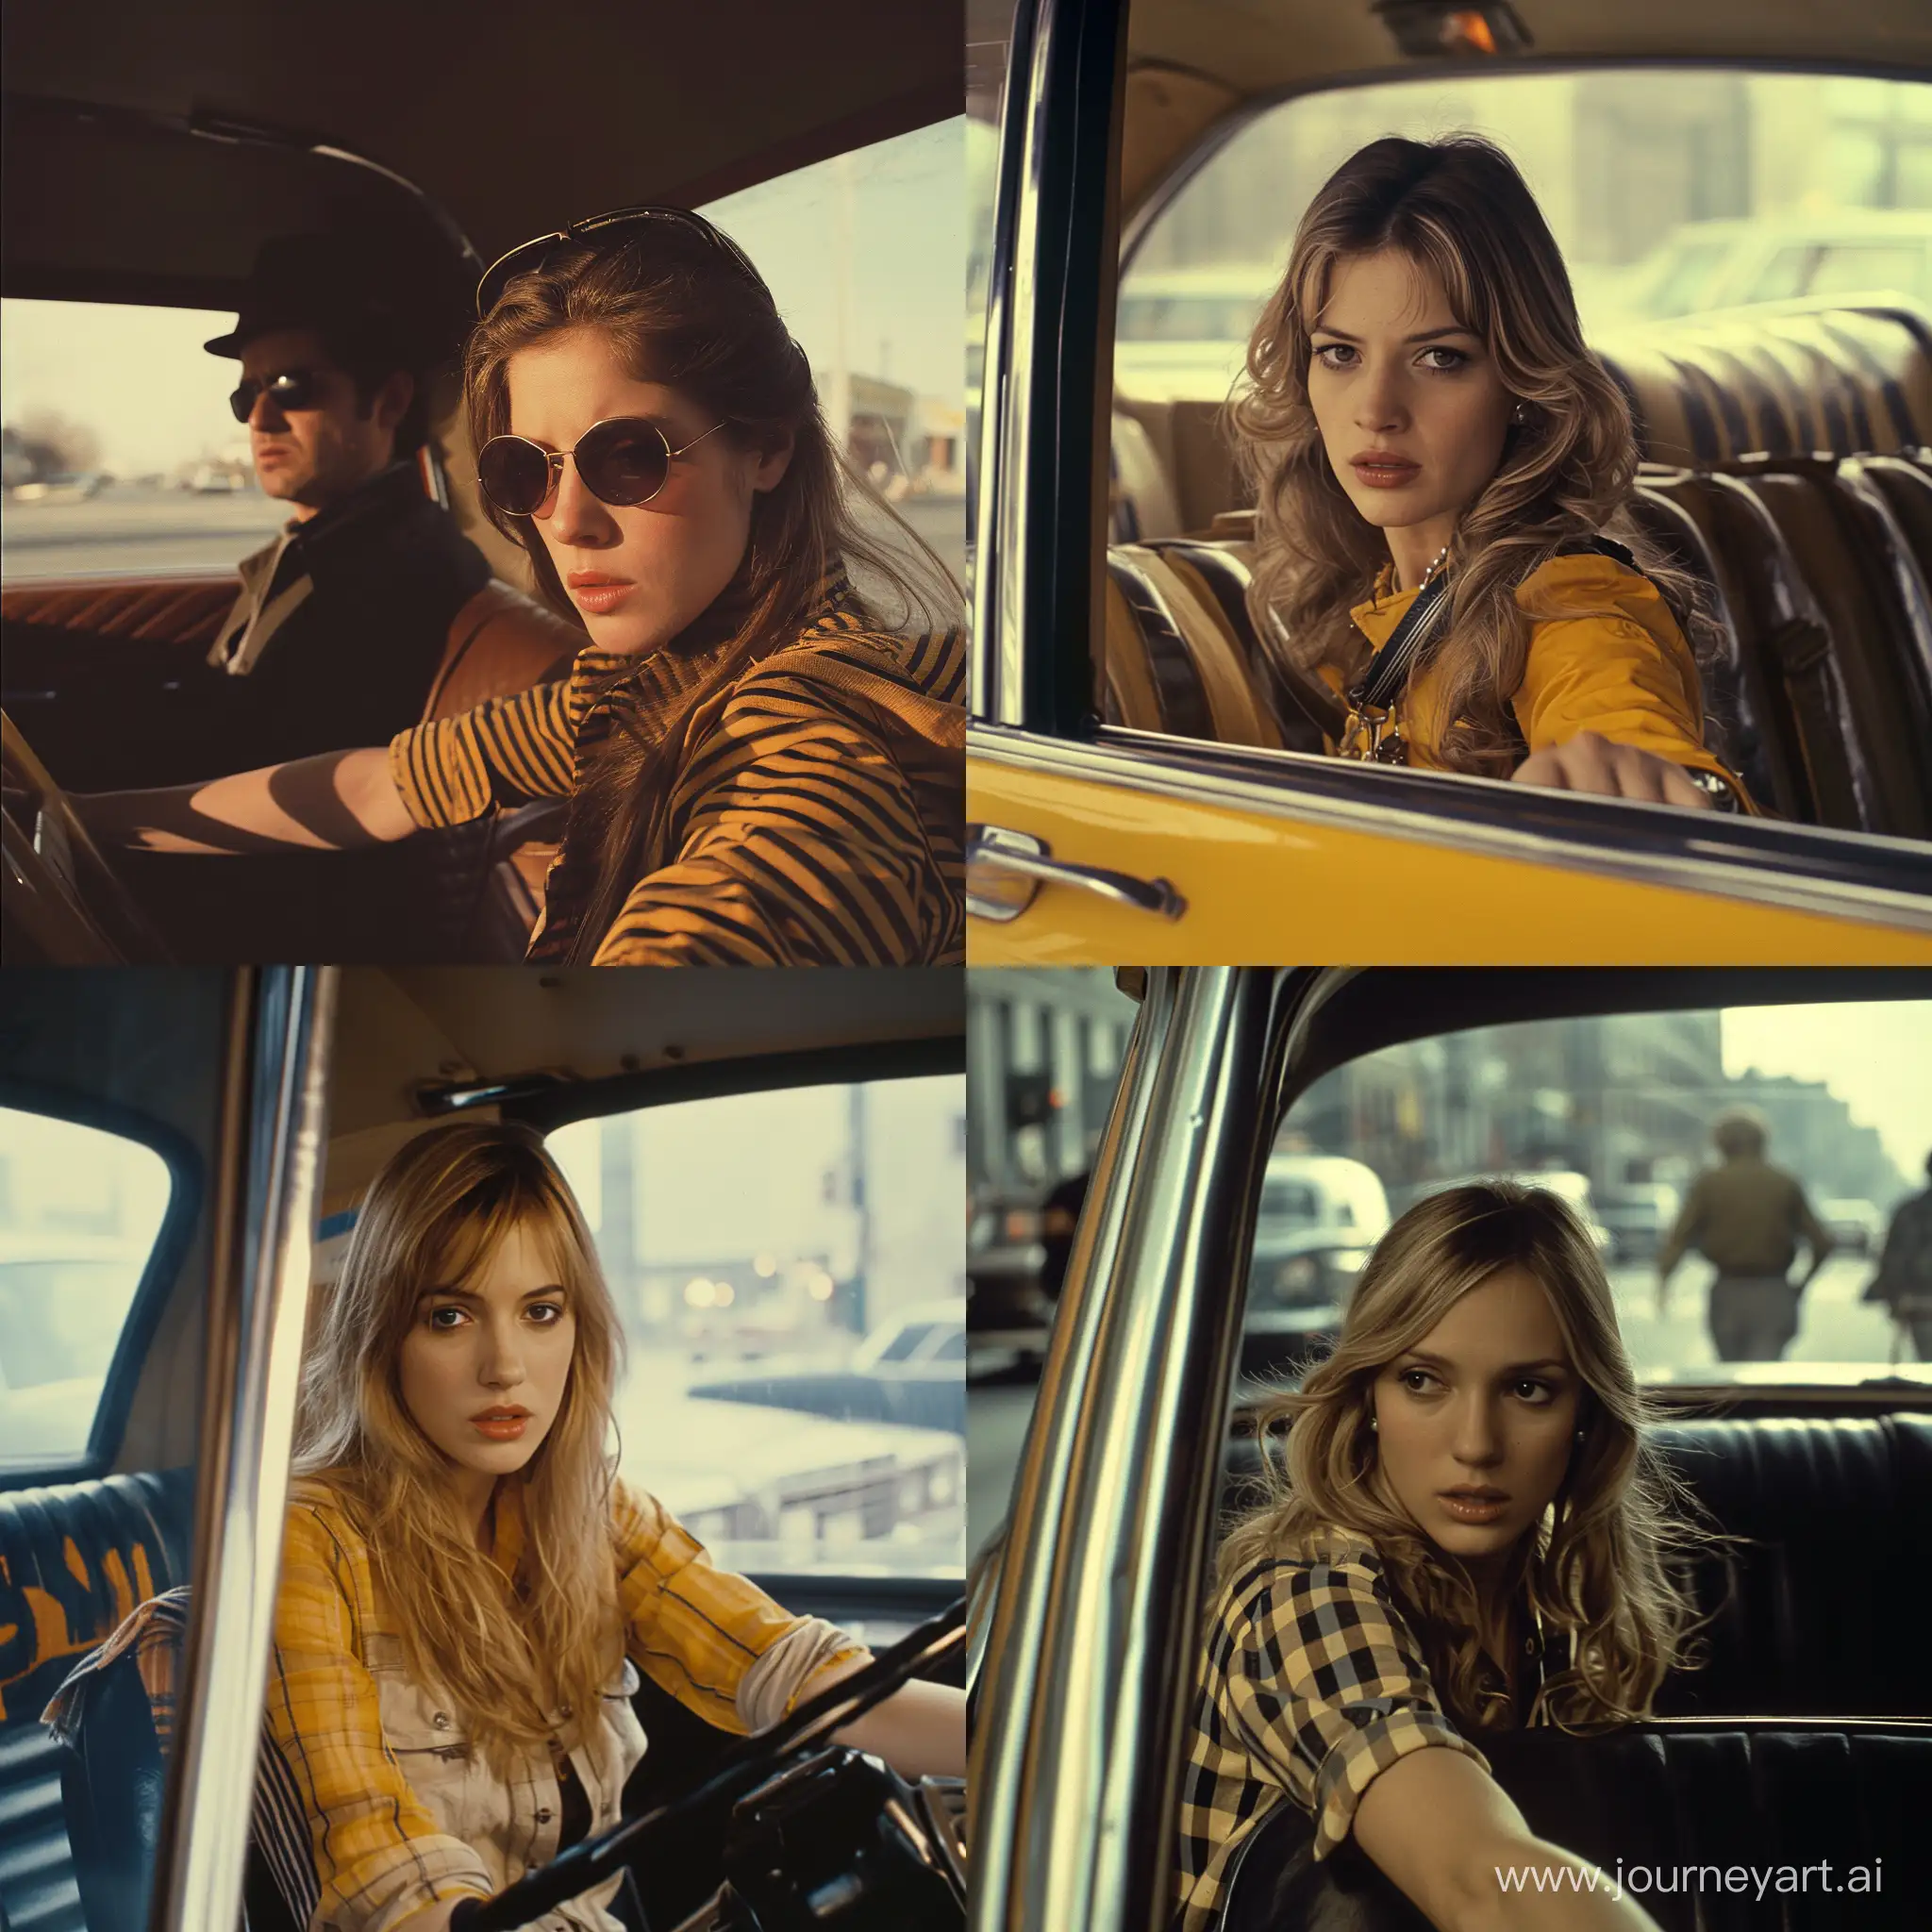 Amanda Seyfried in a cab with travis bickle, taxi driver 1976 movie screenshot, 35mm, martin scosece cinematography